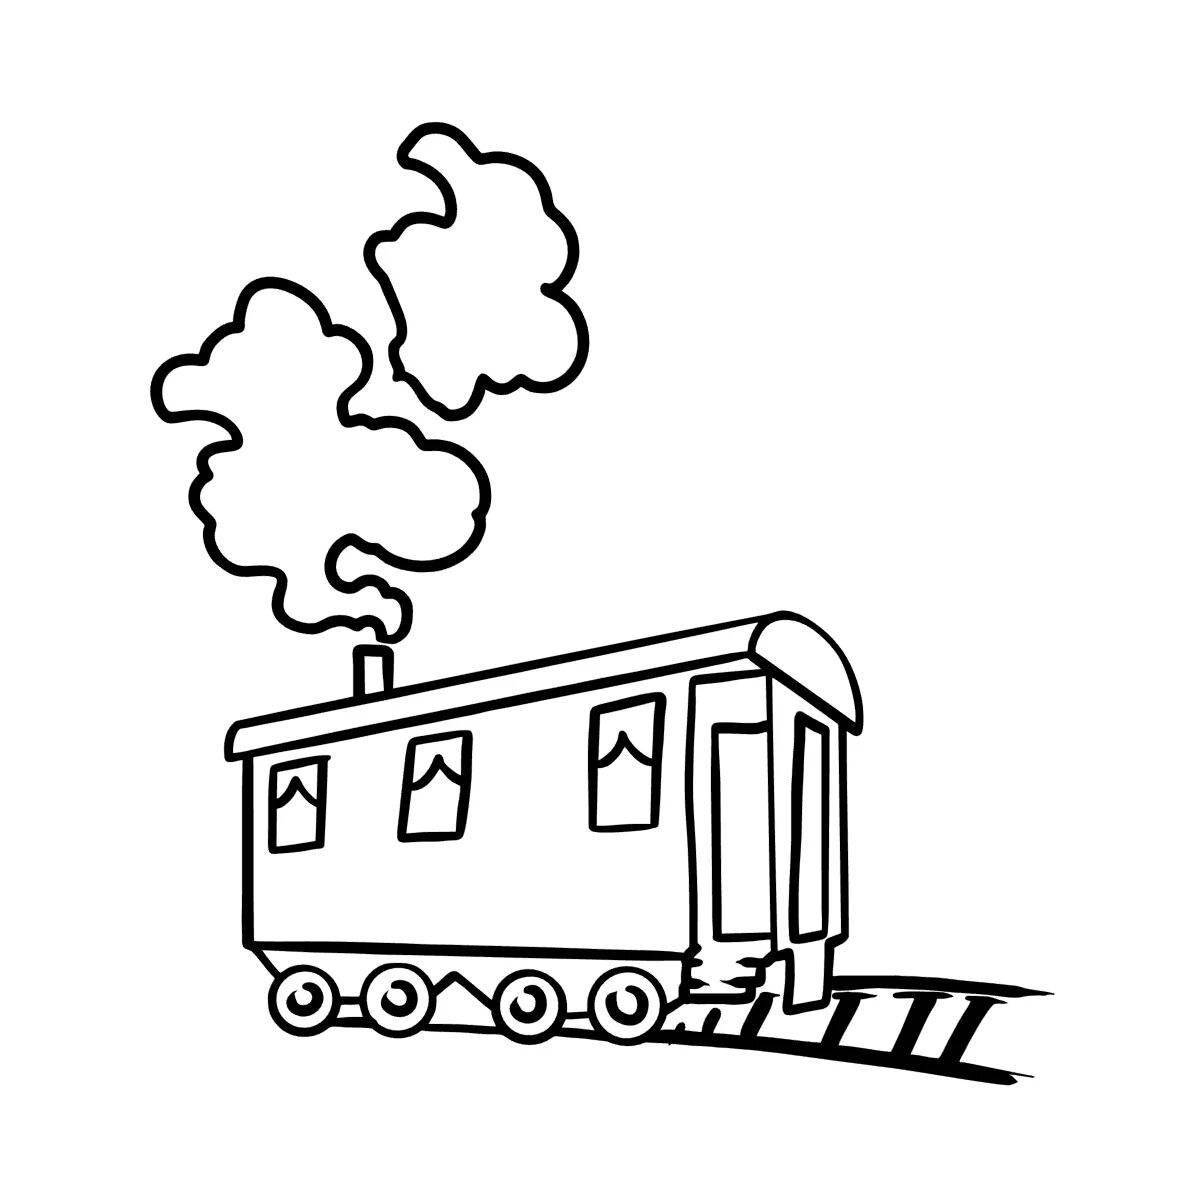 Coloring page of a cheering van for toddlers